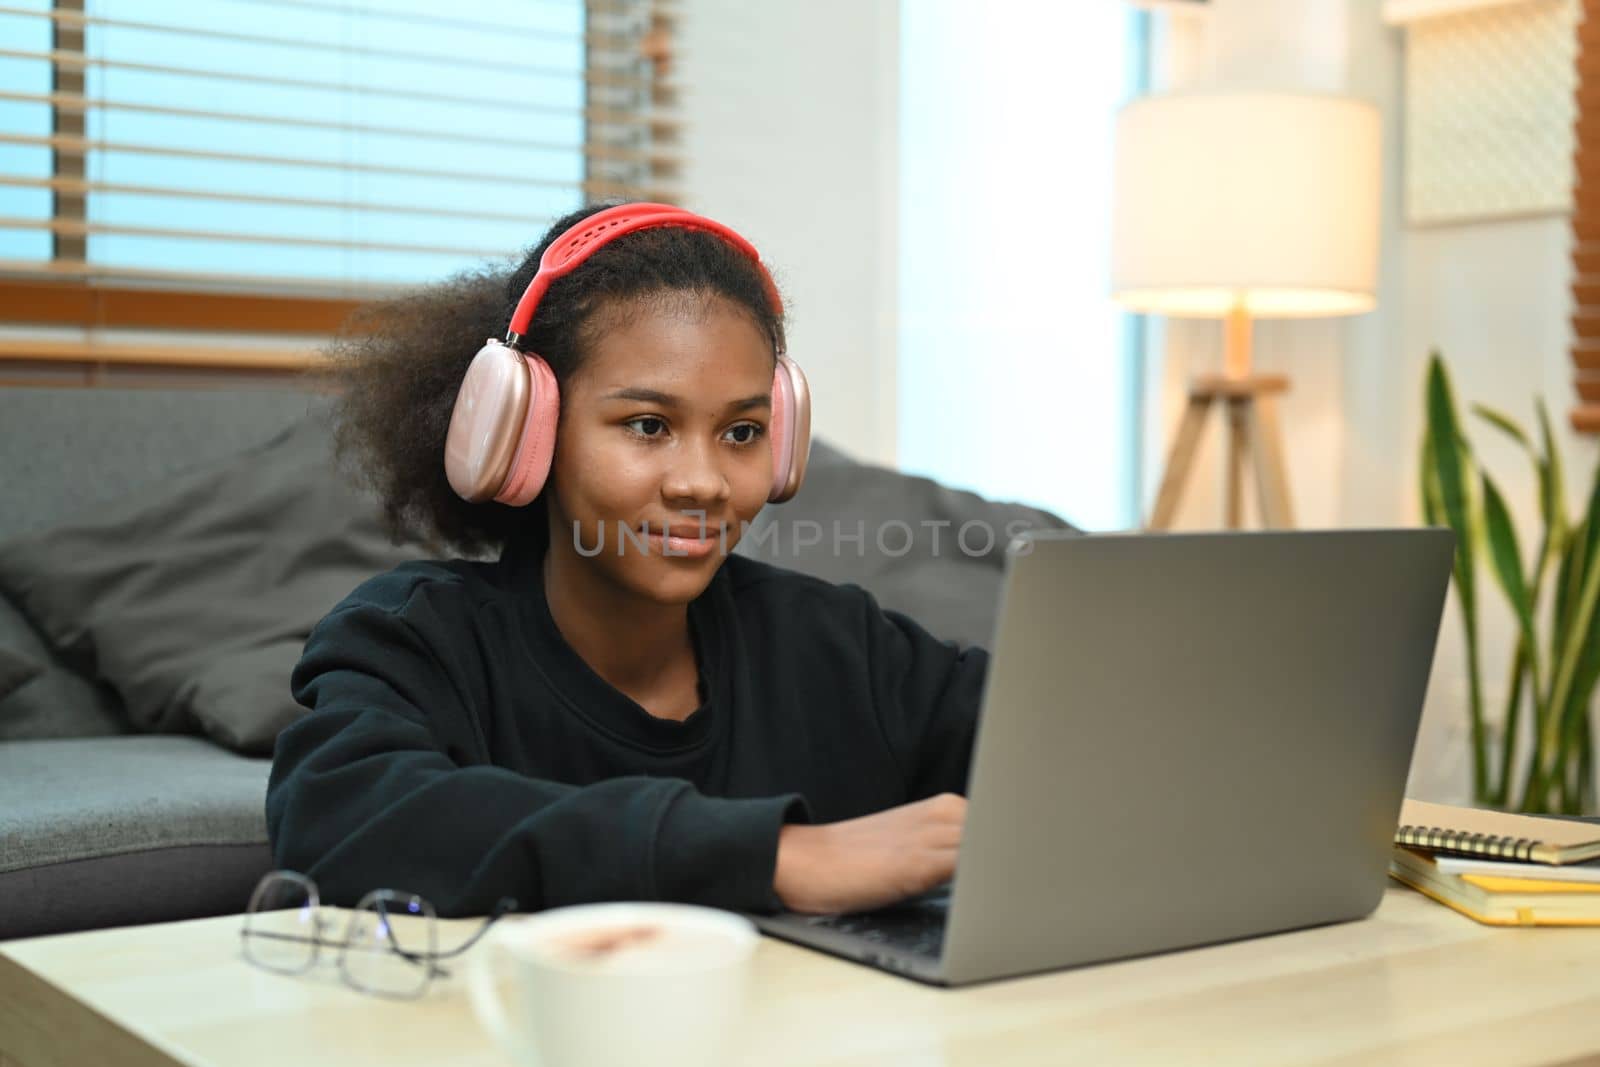 Concentrated teenage woman watching learning online in virtual classroom on laptop computer.